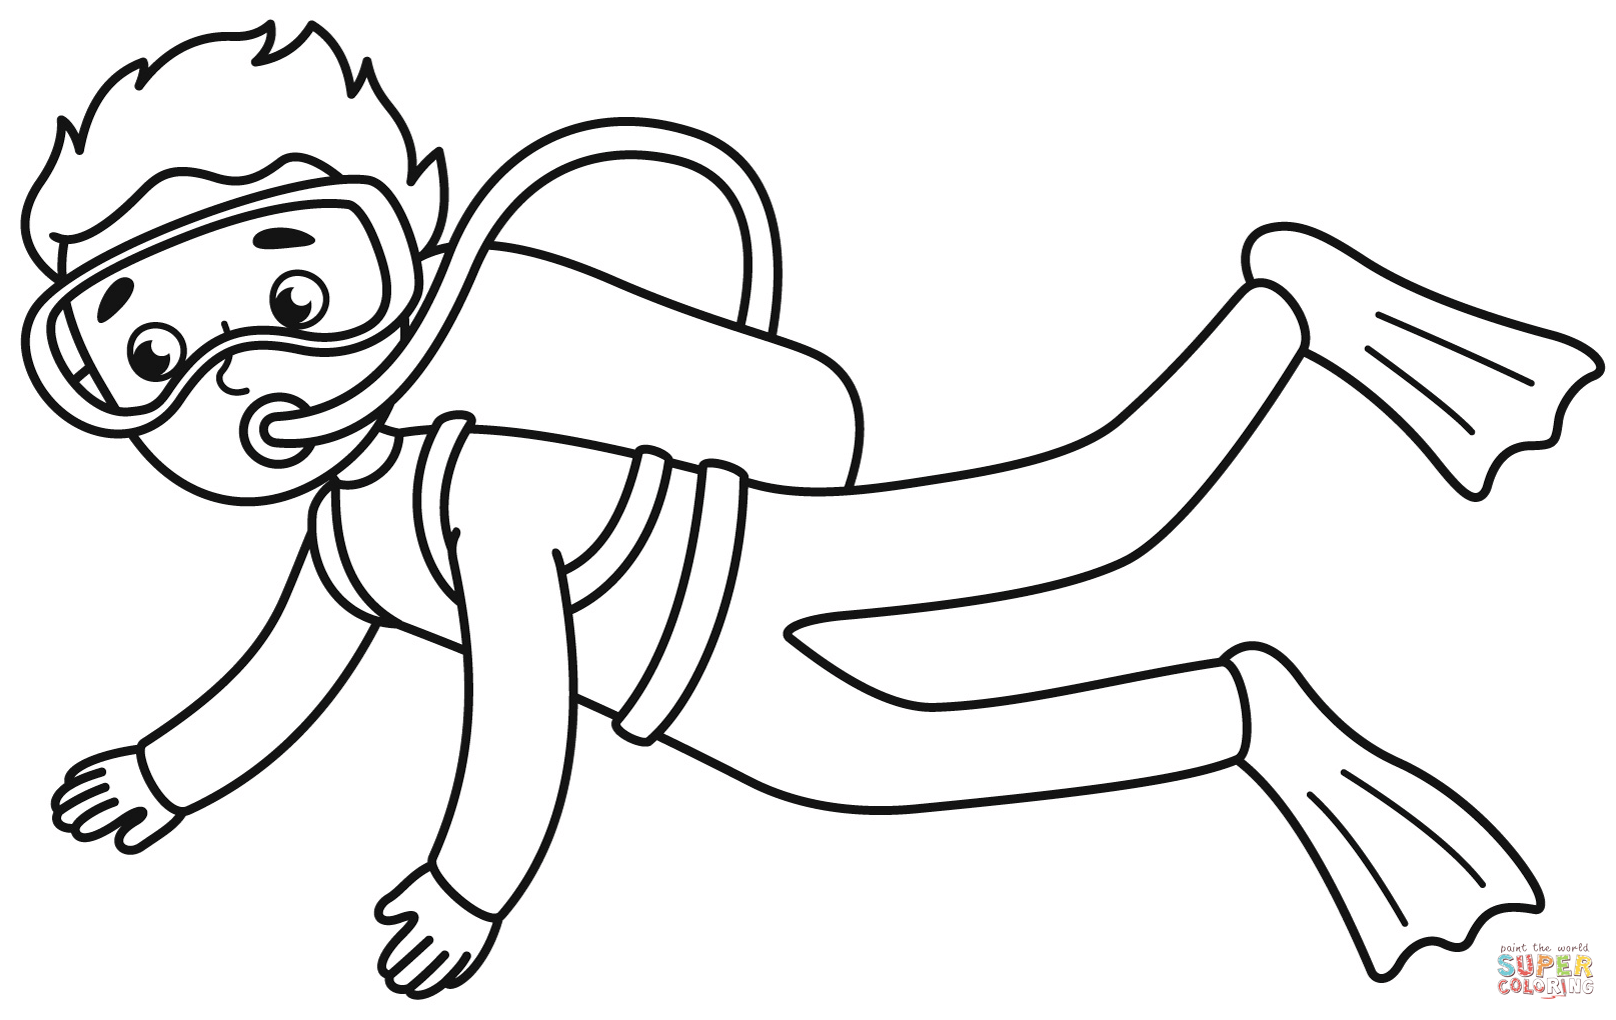 Scuba diver coloring page free printable coloring pages